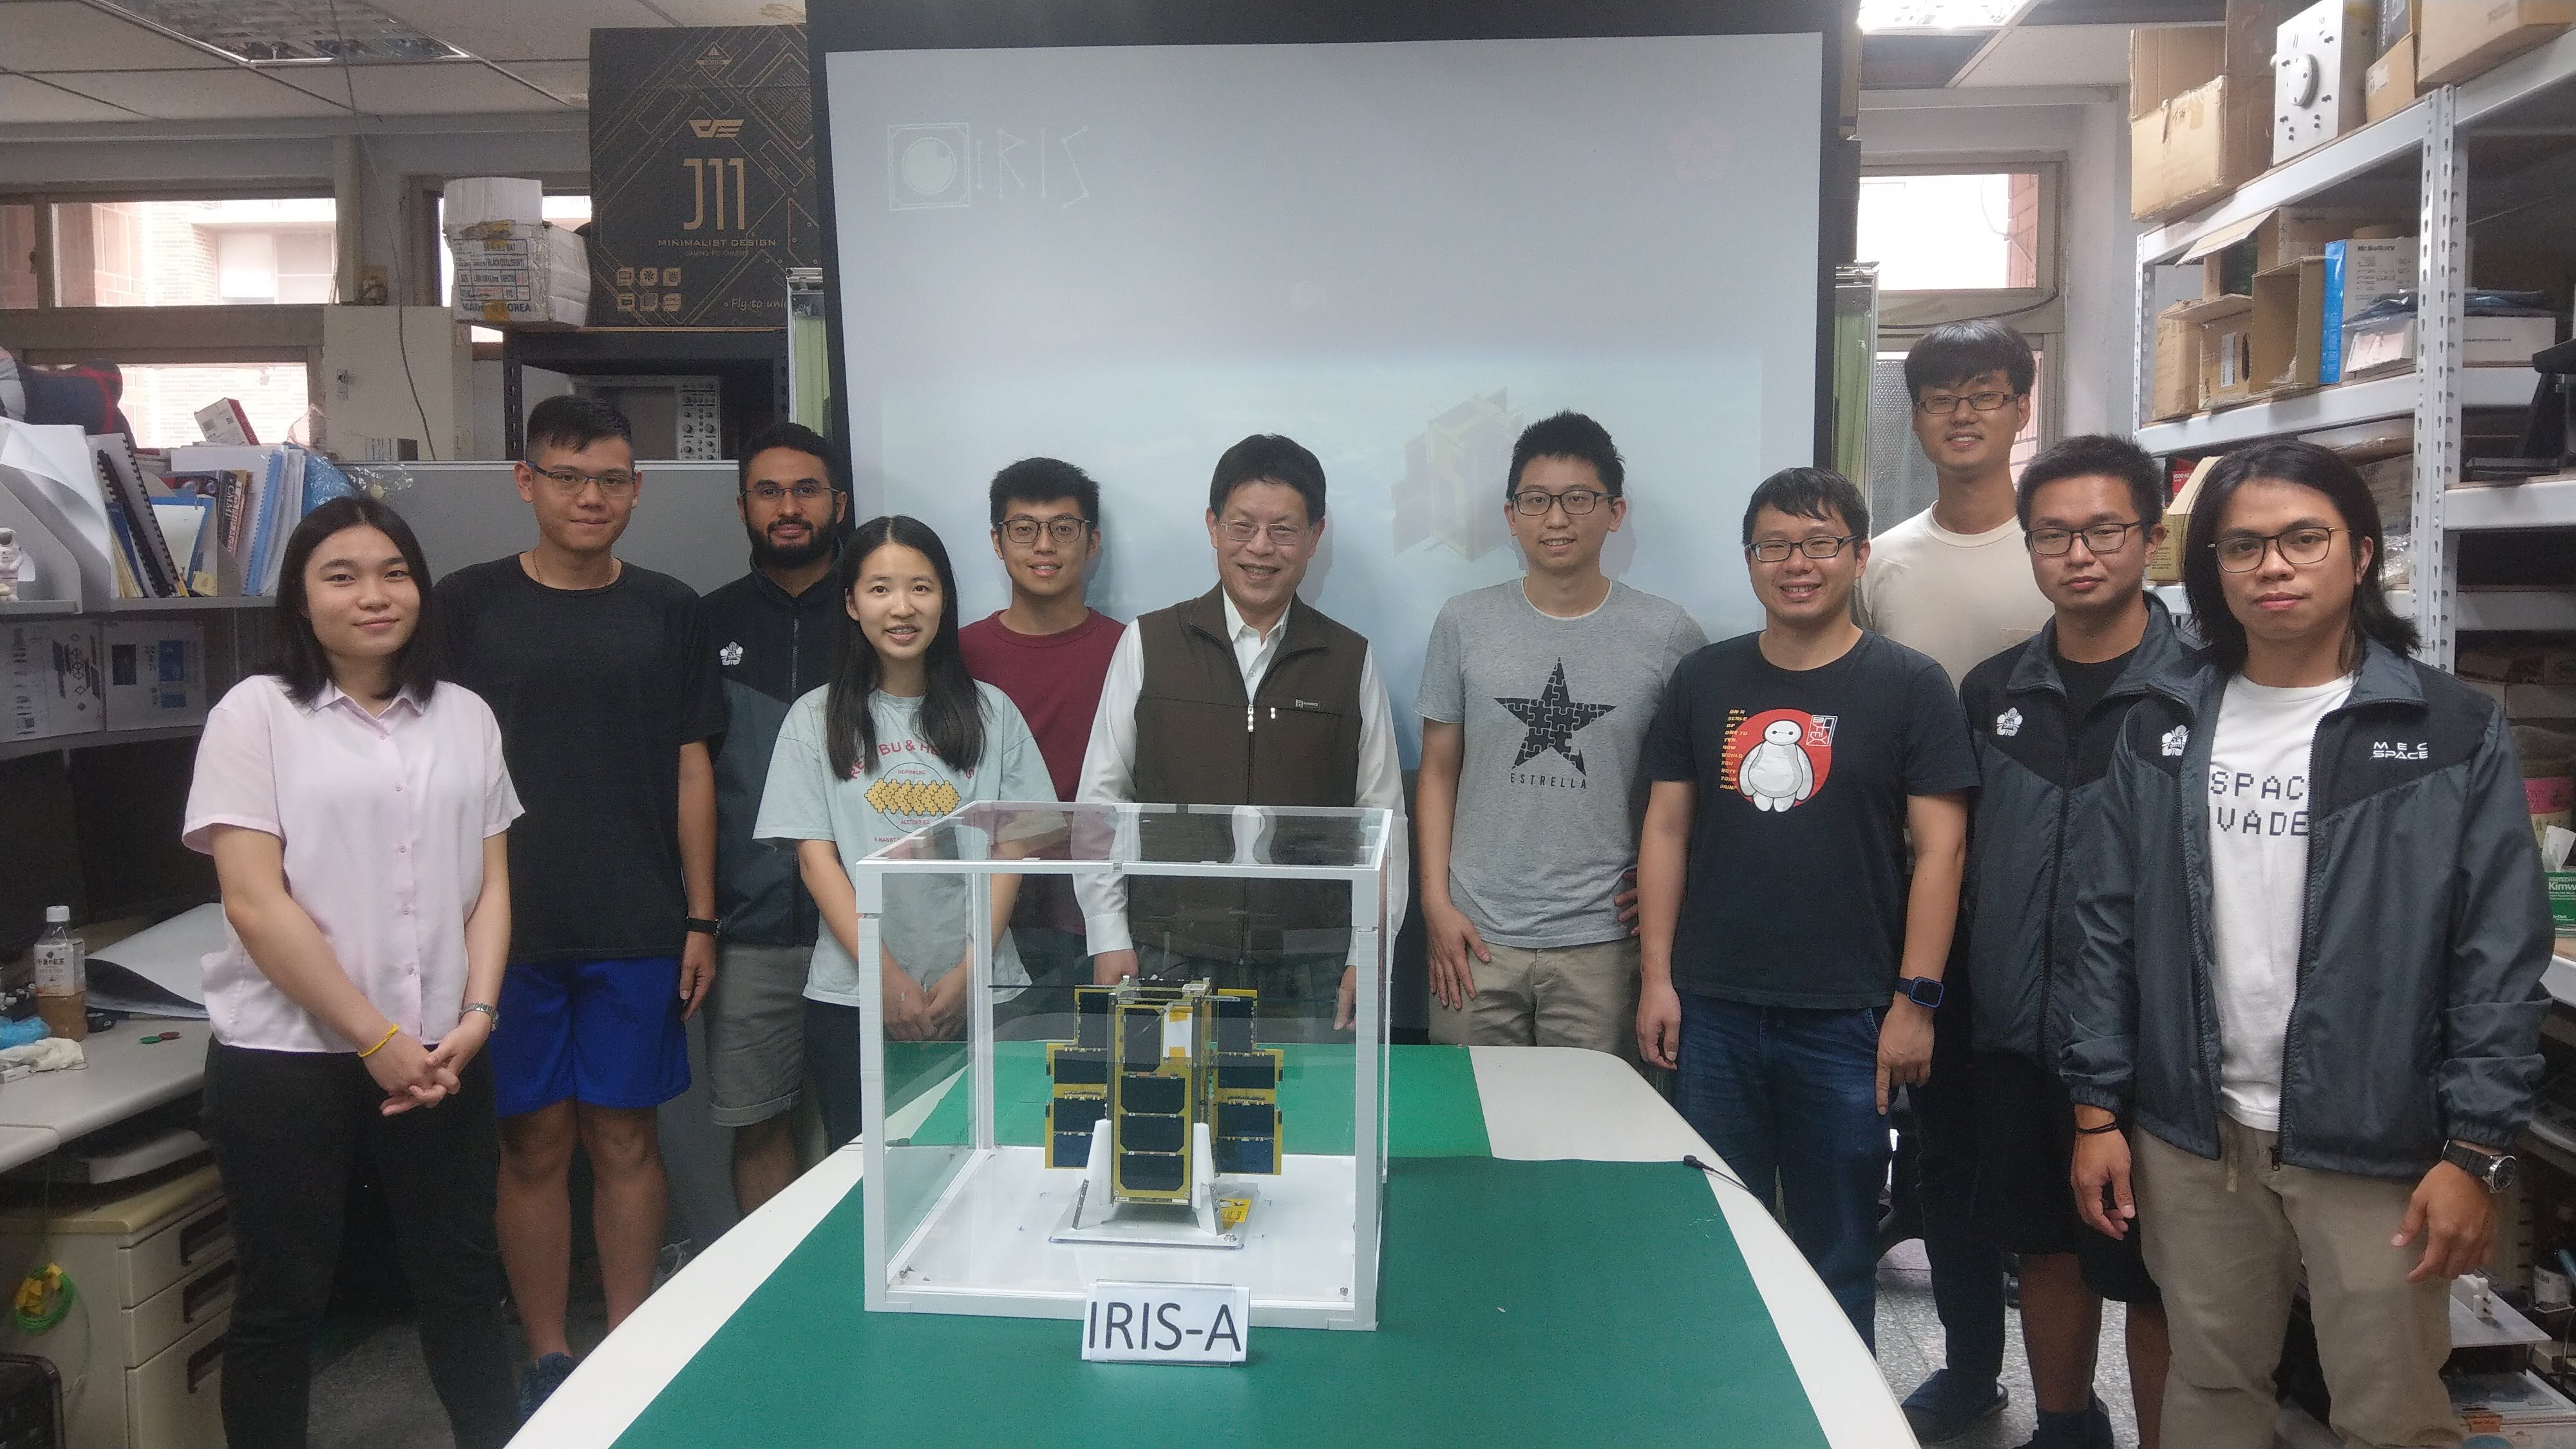 Prof. Jyh-Ching Juang (middle) leads international student team from NCKU in developing the IRIS-A CubeSat